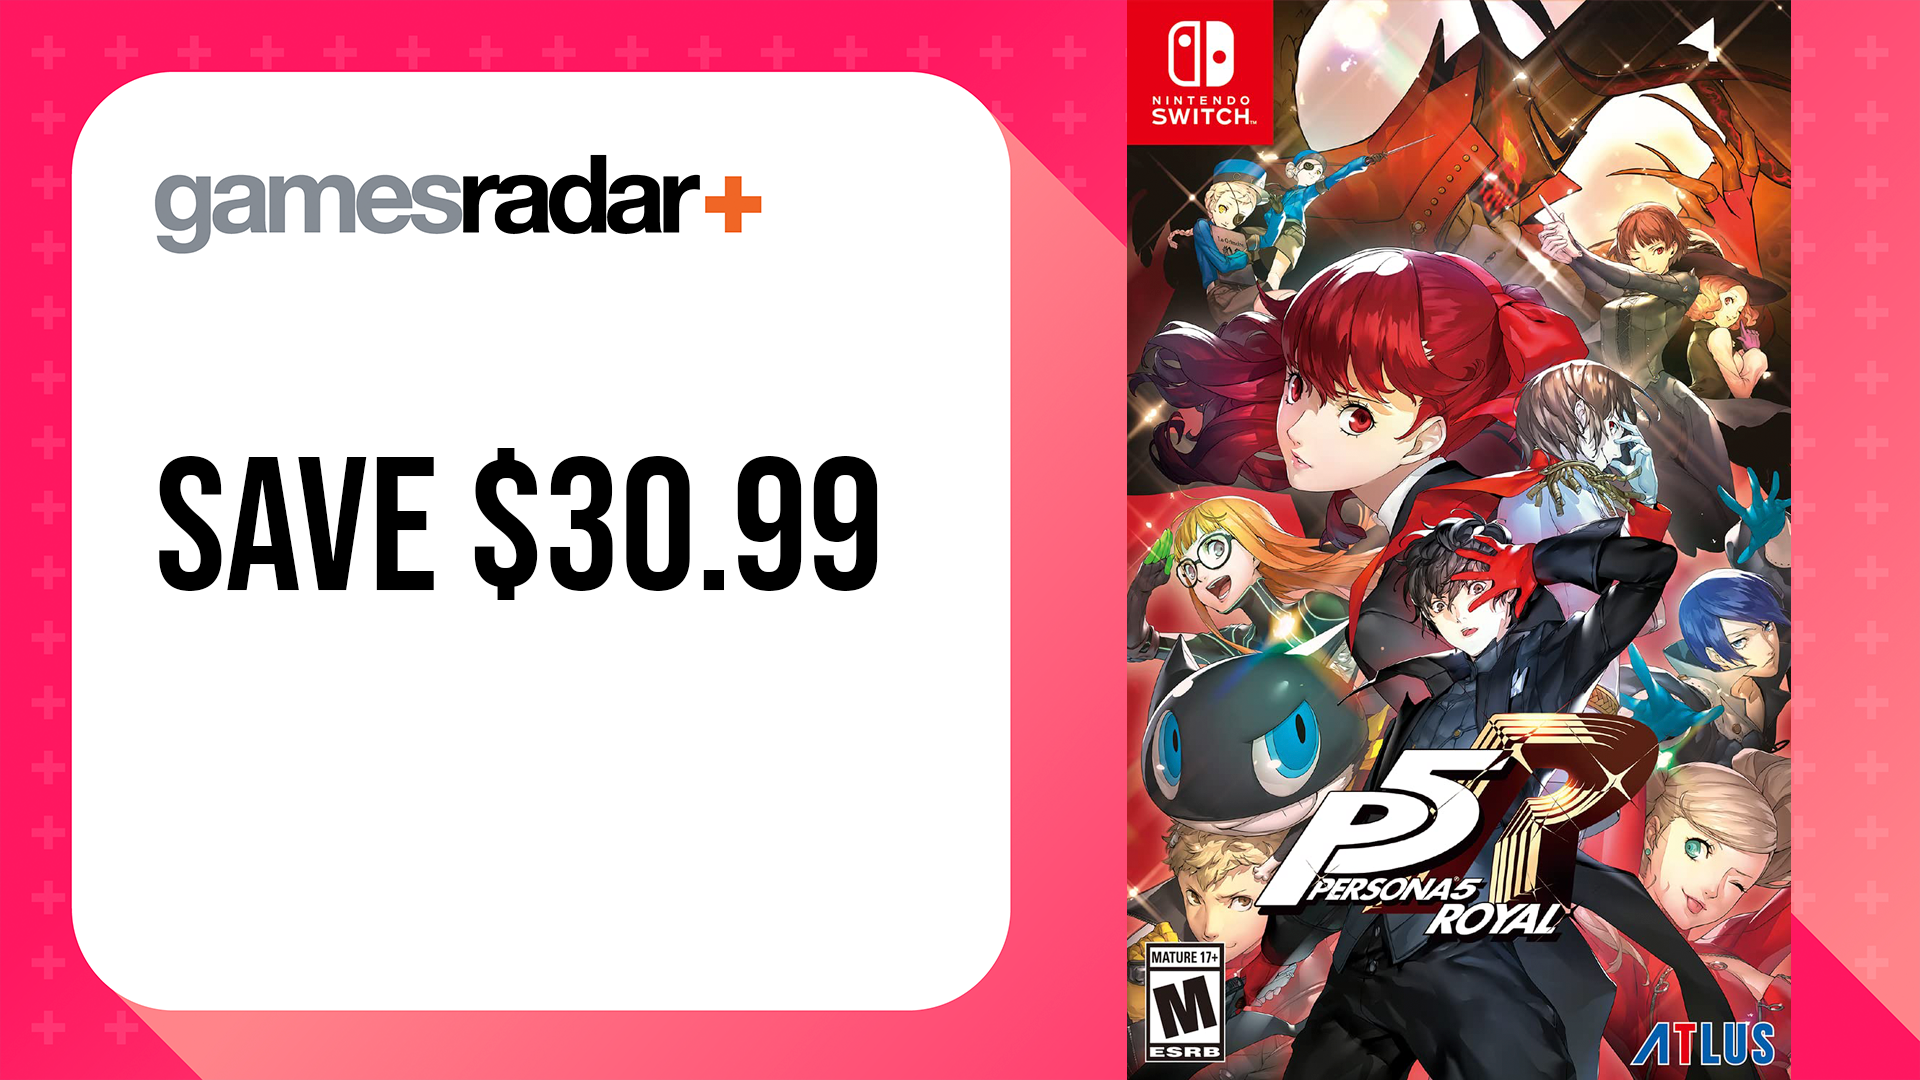 Persona 5 Royal Nintendo Switch deal